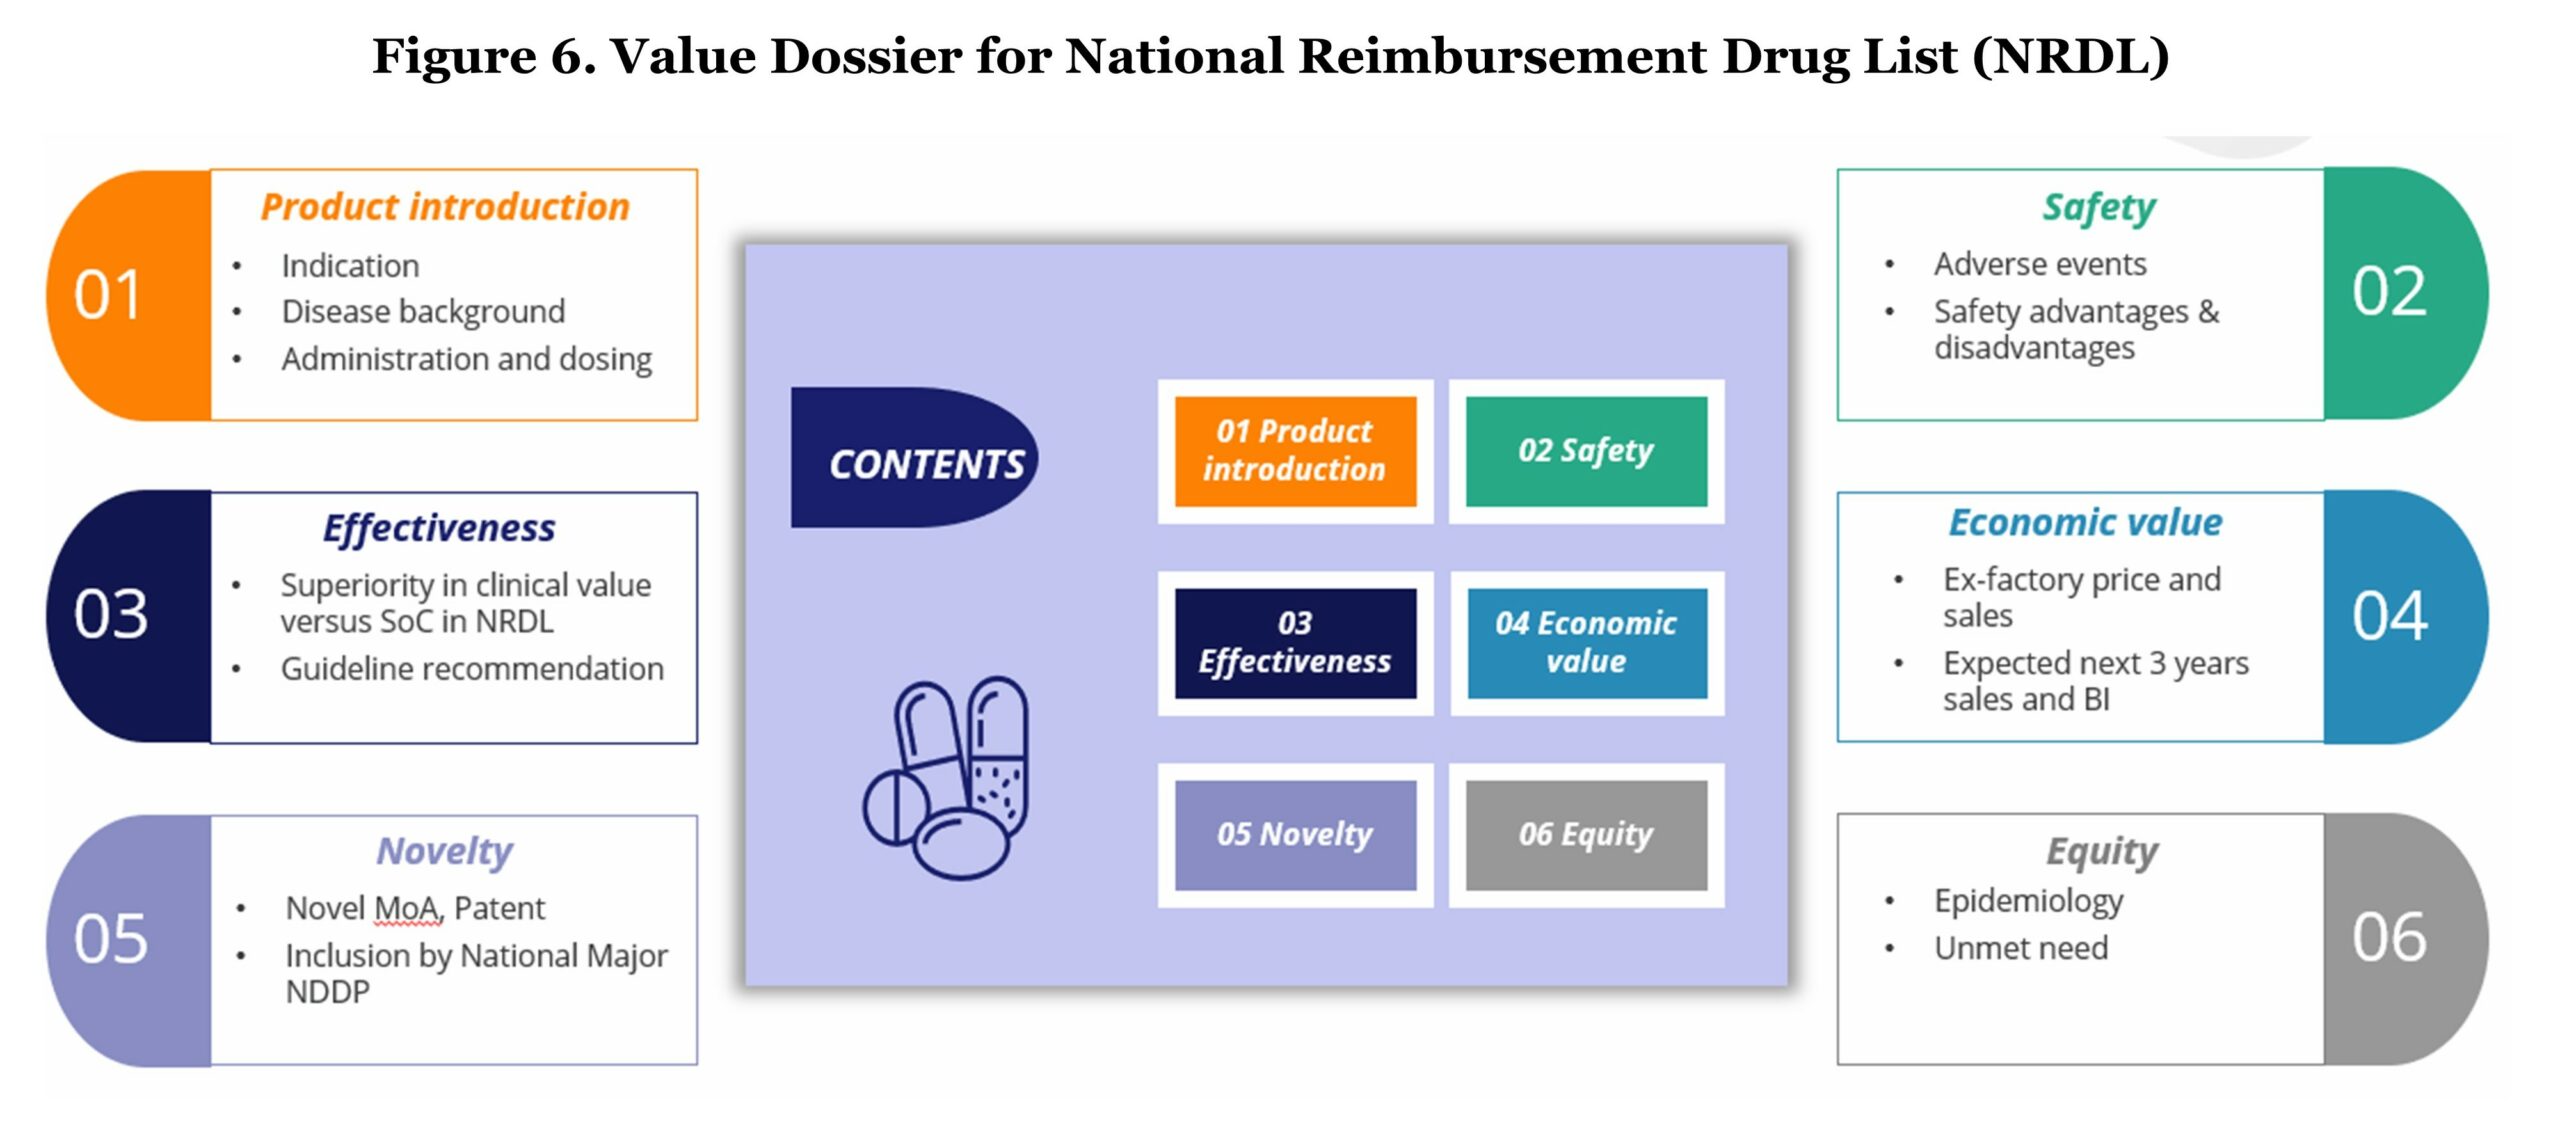 Figure 6. Value Dossier for National Reimbursement Drug List (NRDL) contains six areas: 1) Product Introduction; 2) Safety; 3) Effectiveness; 4) Economic Value; 5) Novelty; and 6) Equity.